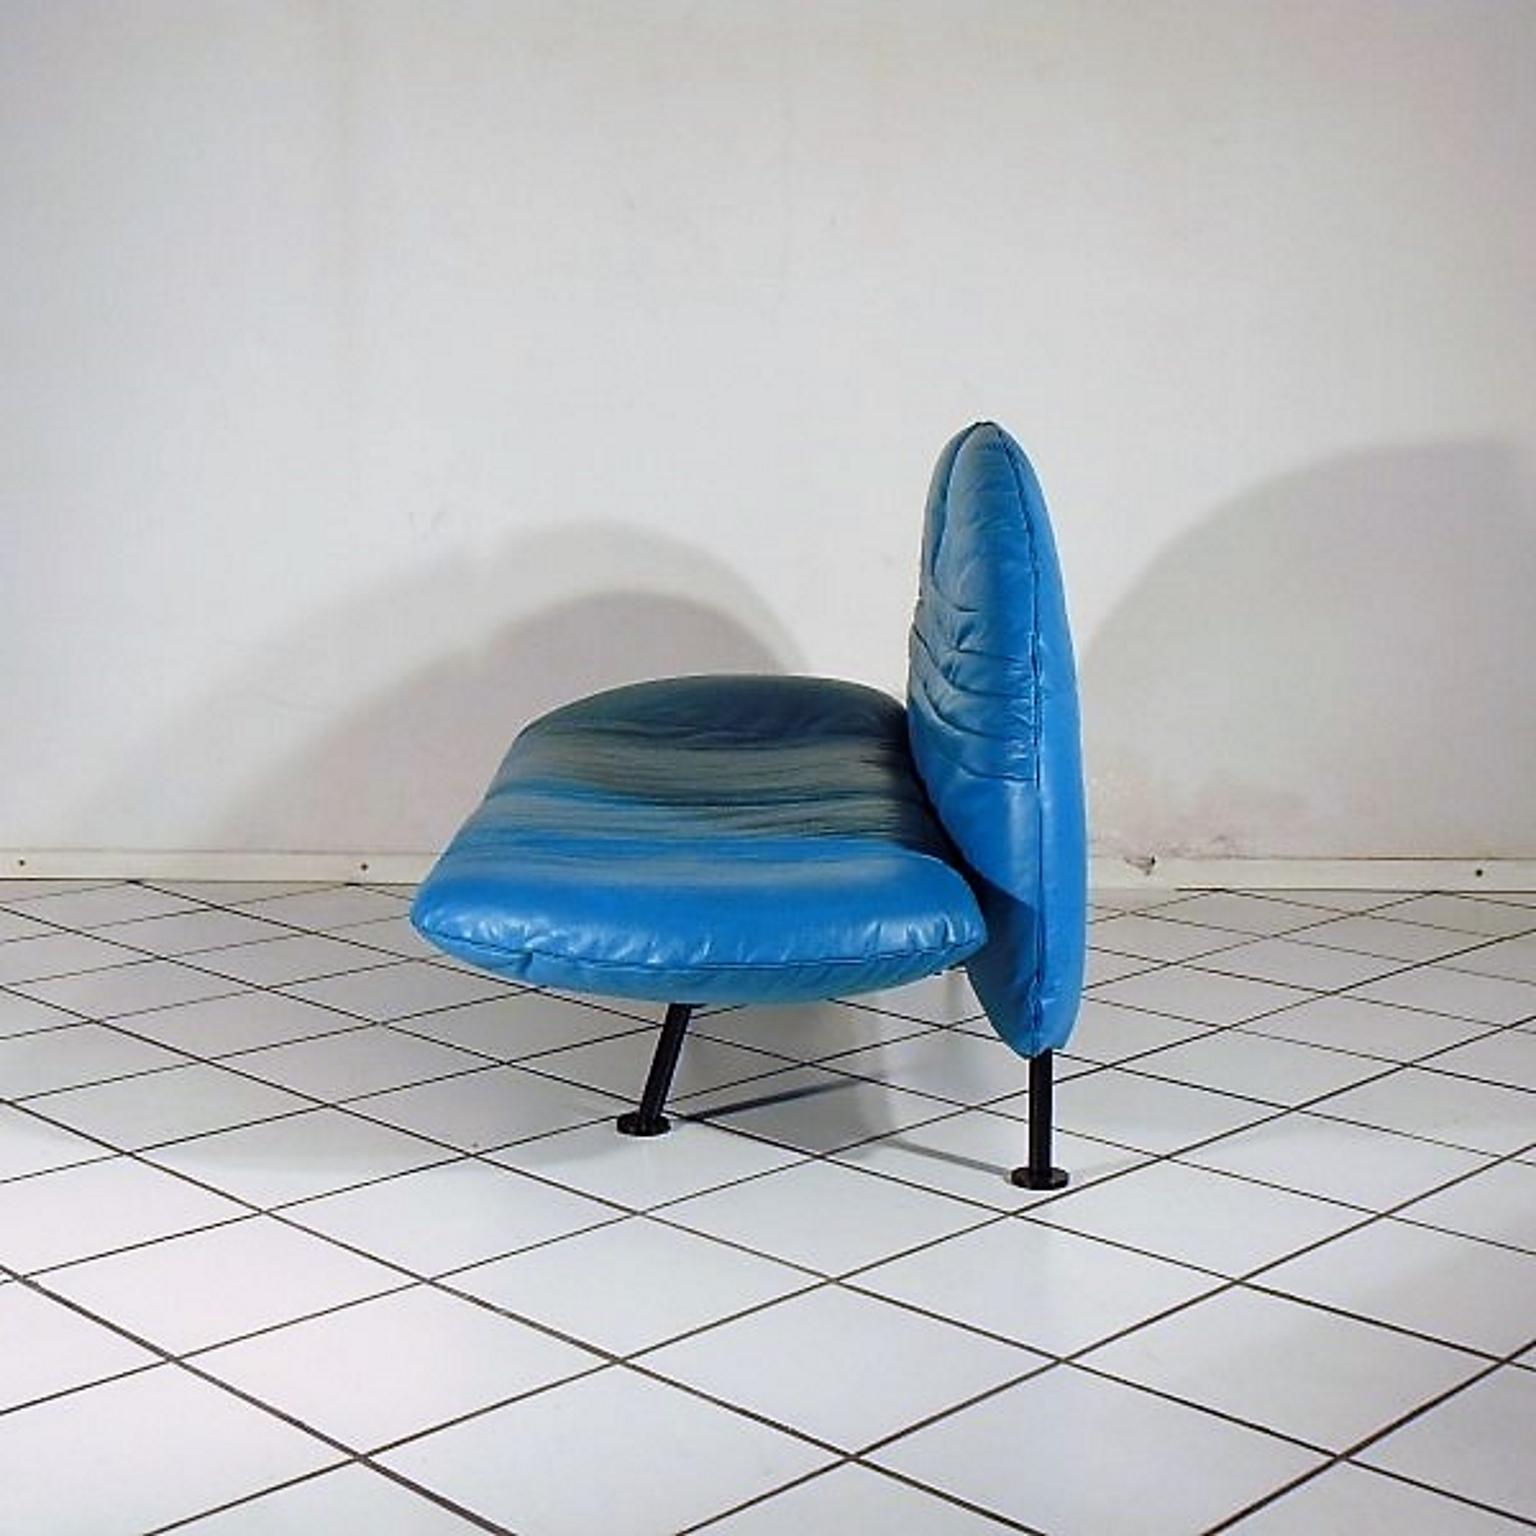 1980s Adjustable Loveseat Turquoise Leather by Walter Leeman for Sormani, Italy For Sale 3